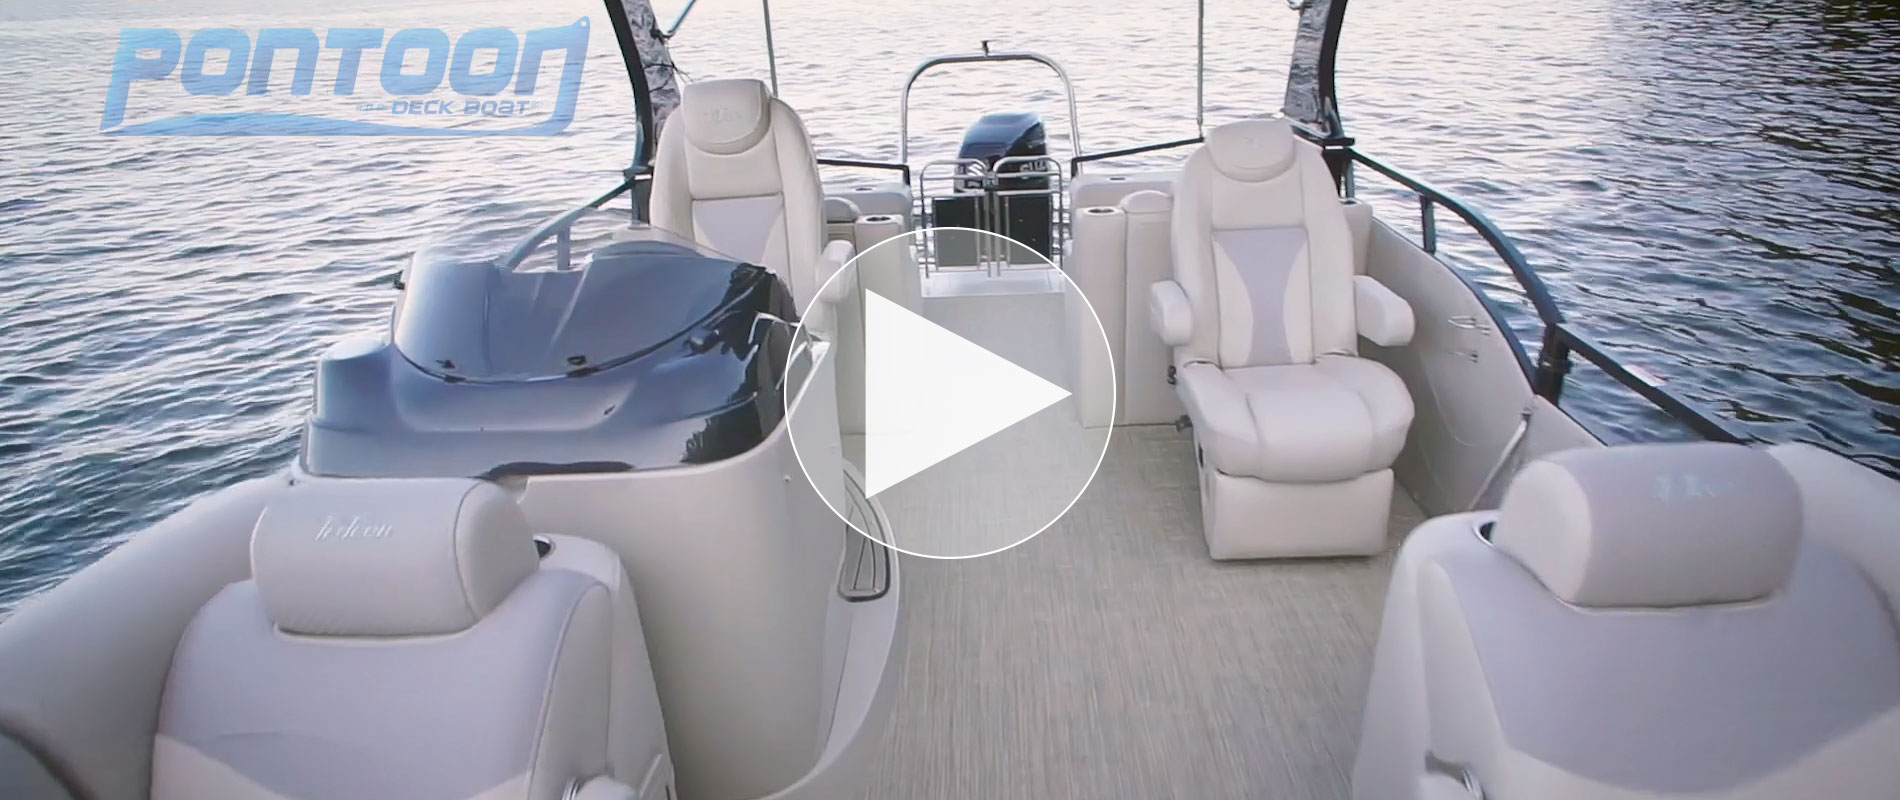 View Video of the Pontoon & Deck Boat Magazine 2018 Shootout featuring the SportToon 28TT RFL